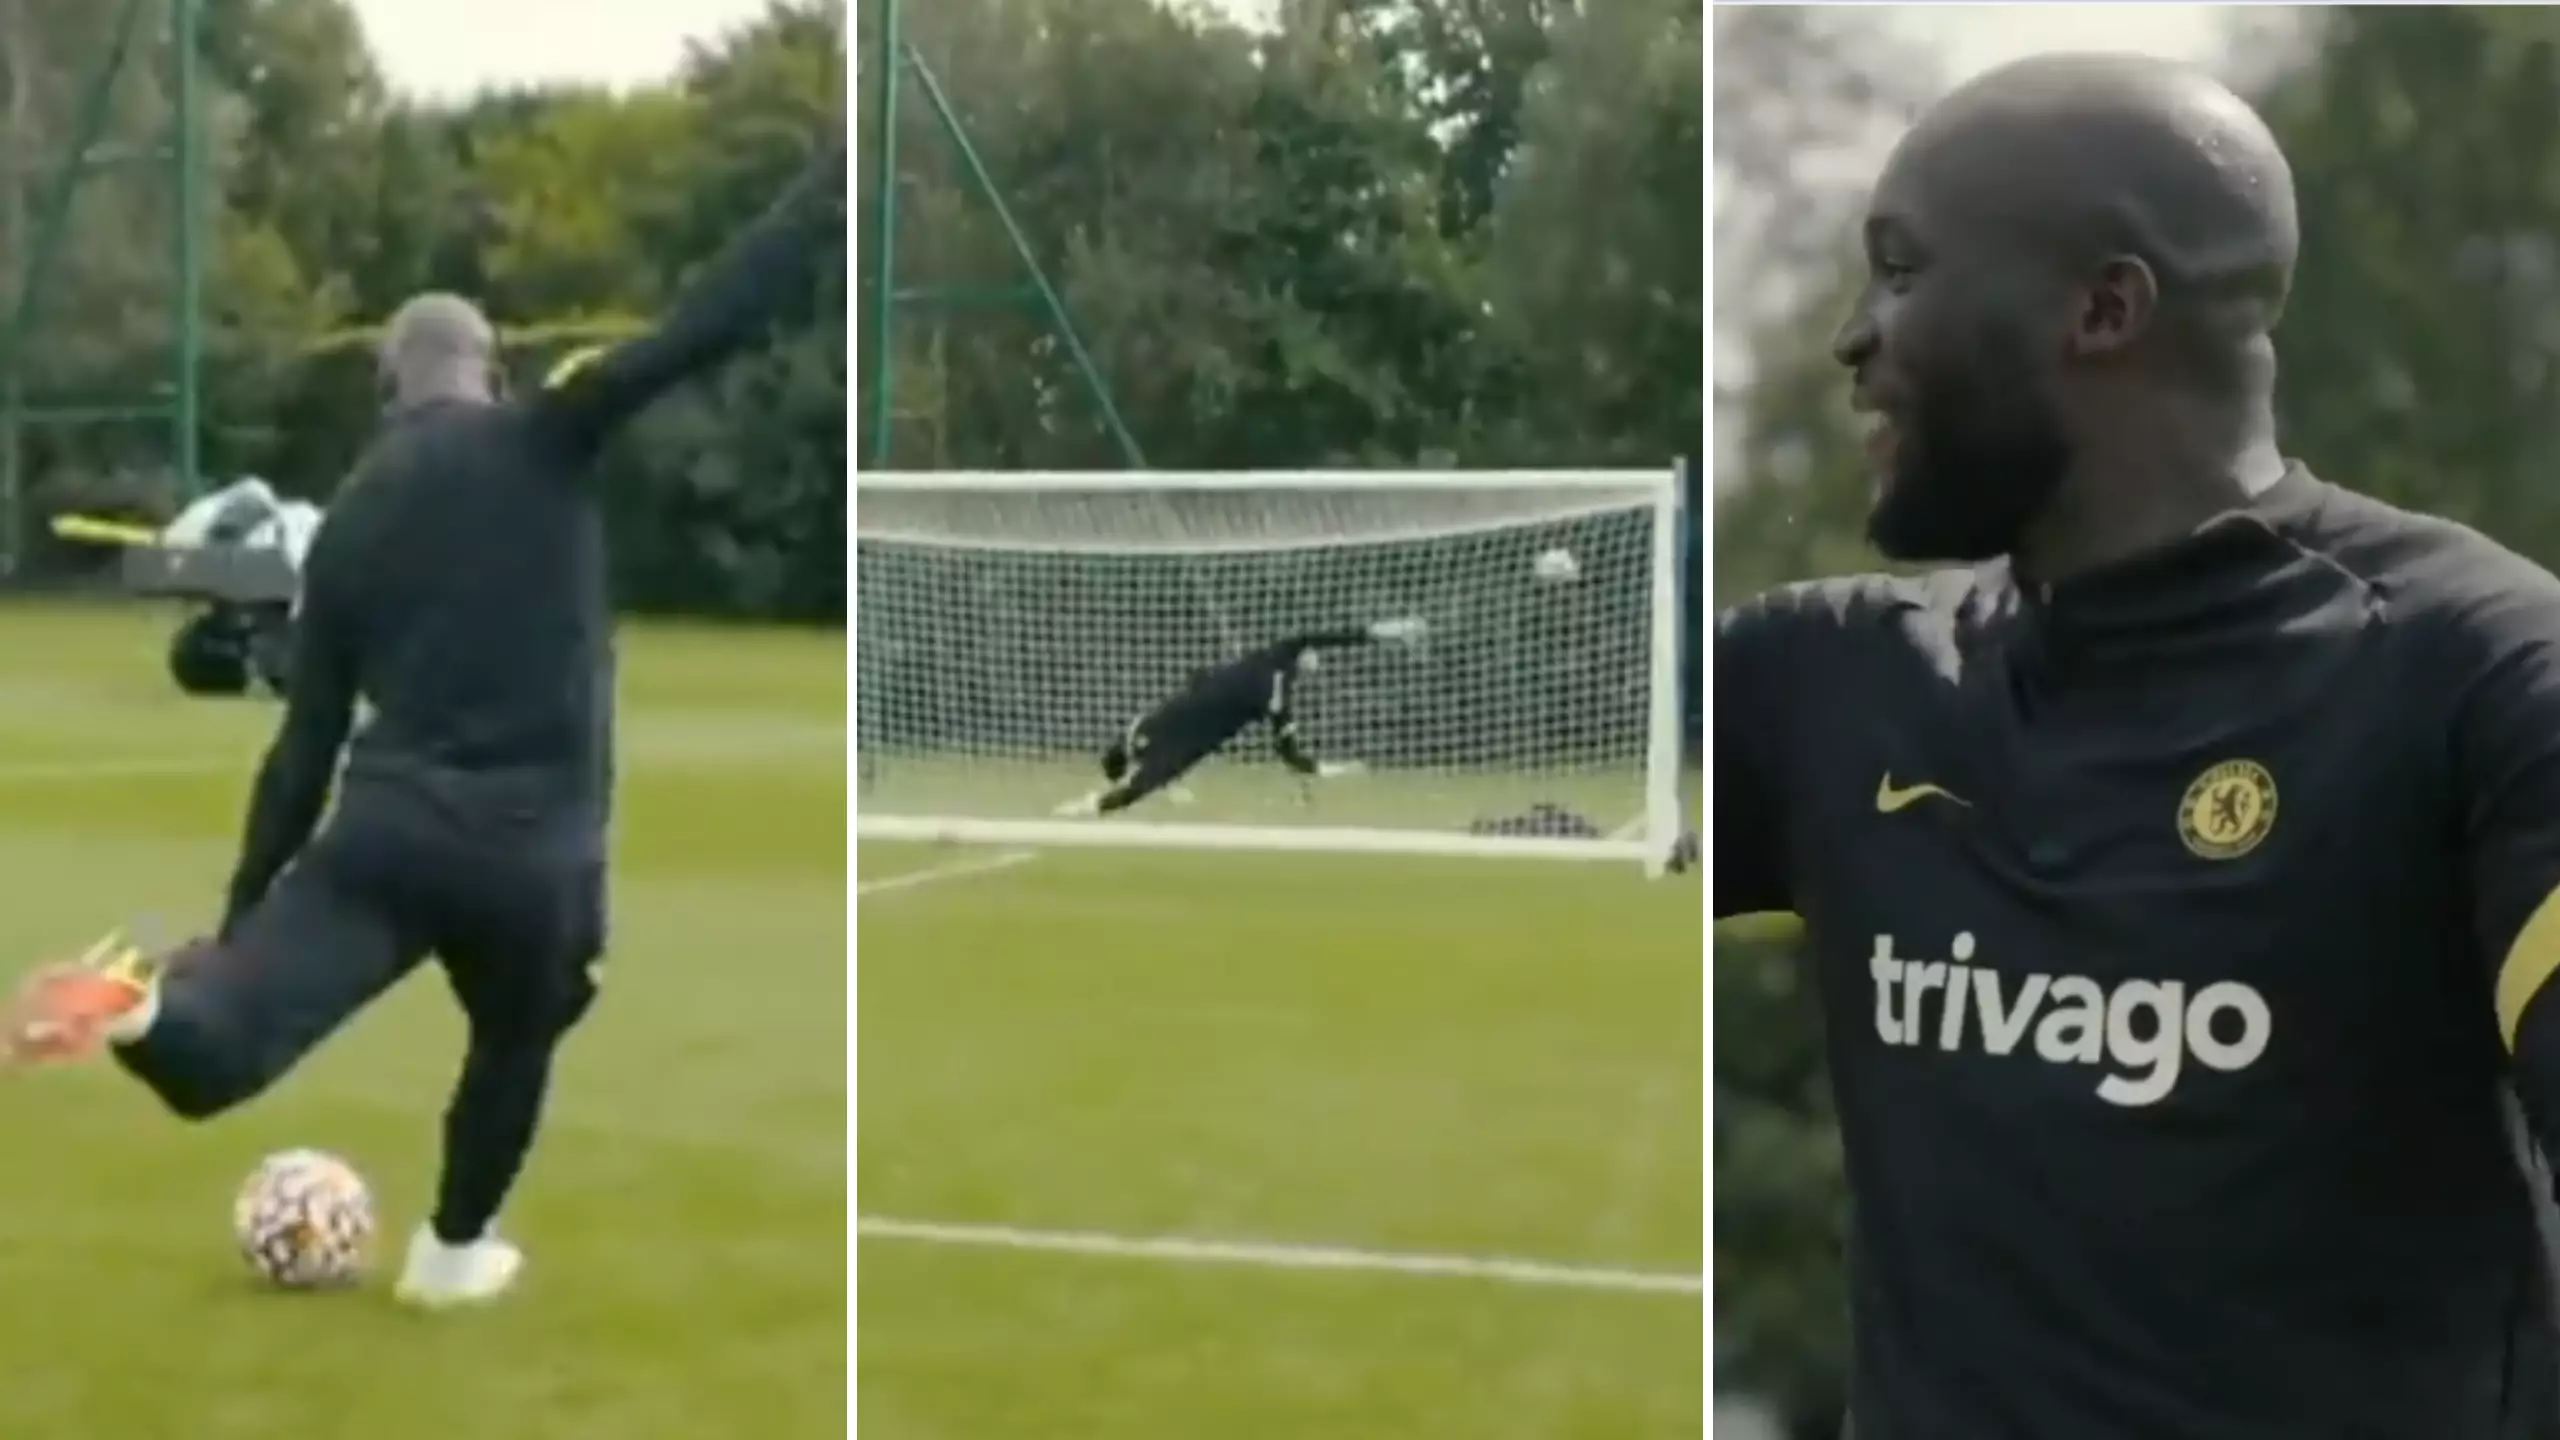 Romelu Lukaku's Message To Chelsea Players After Training Worldie Proves Just How Confident He Is